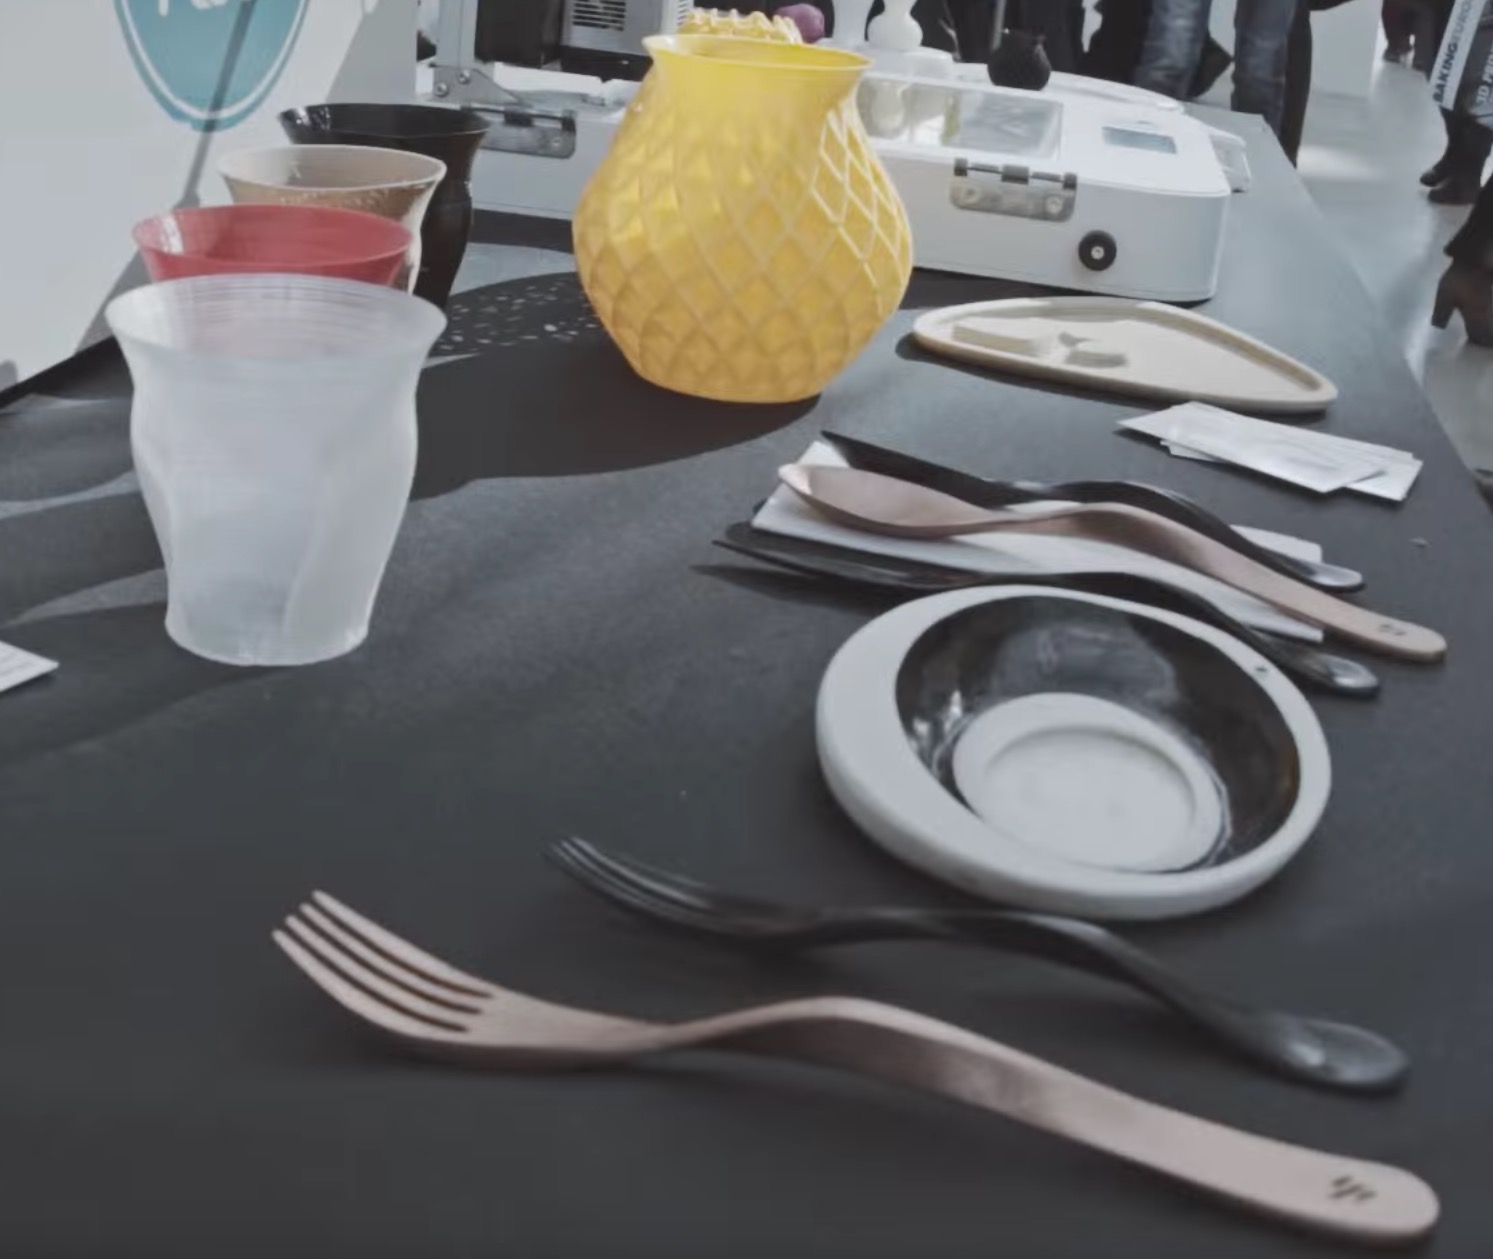  3D printed utensils to be used during the Food Ink dinners. I'm not sure about those cups... 